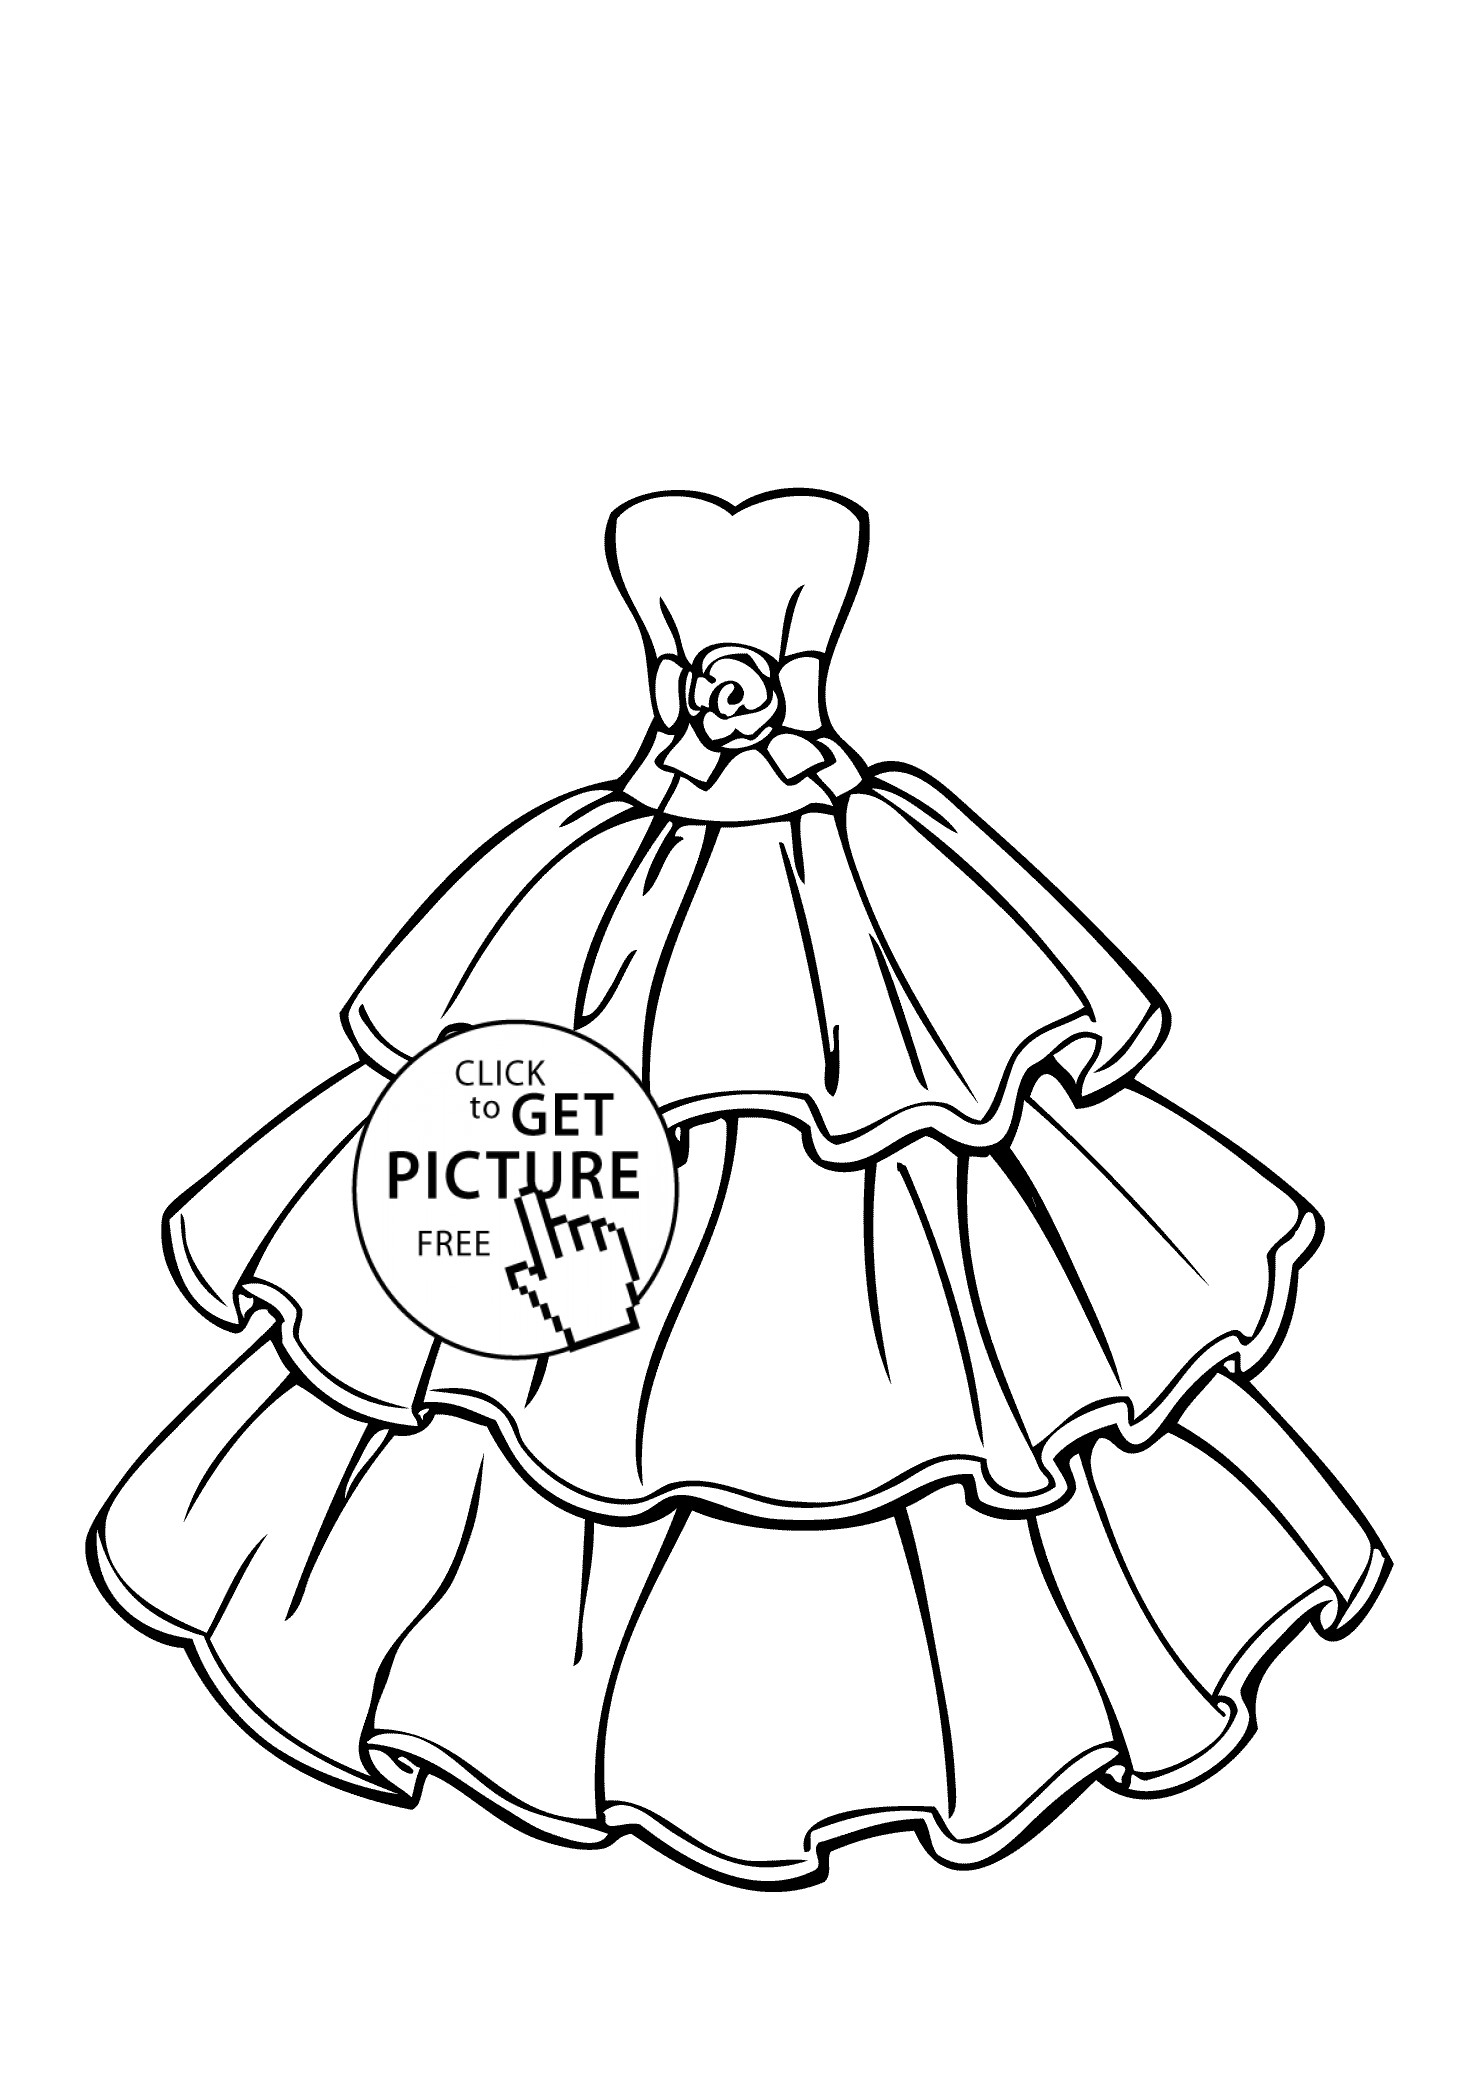 Coloring Pages For Girls Dresses
 Wedding dress beautiful coloring page for girls printable